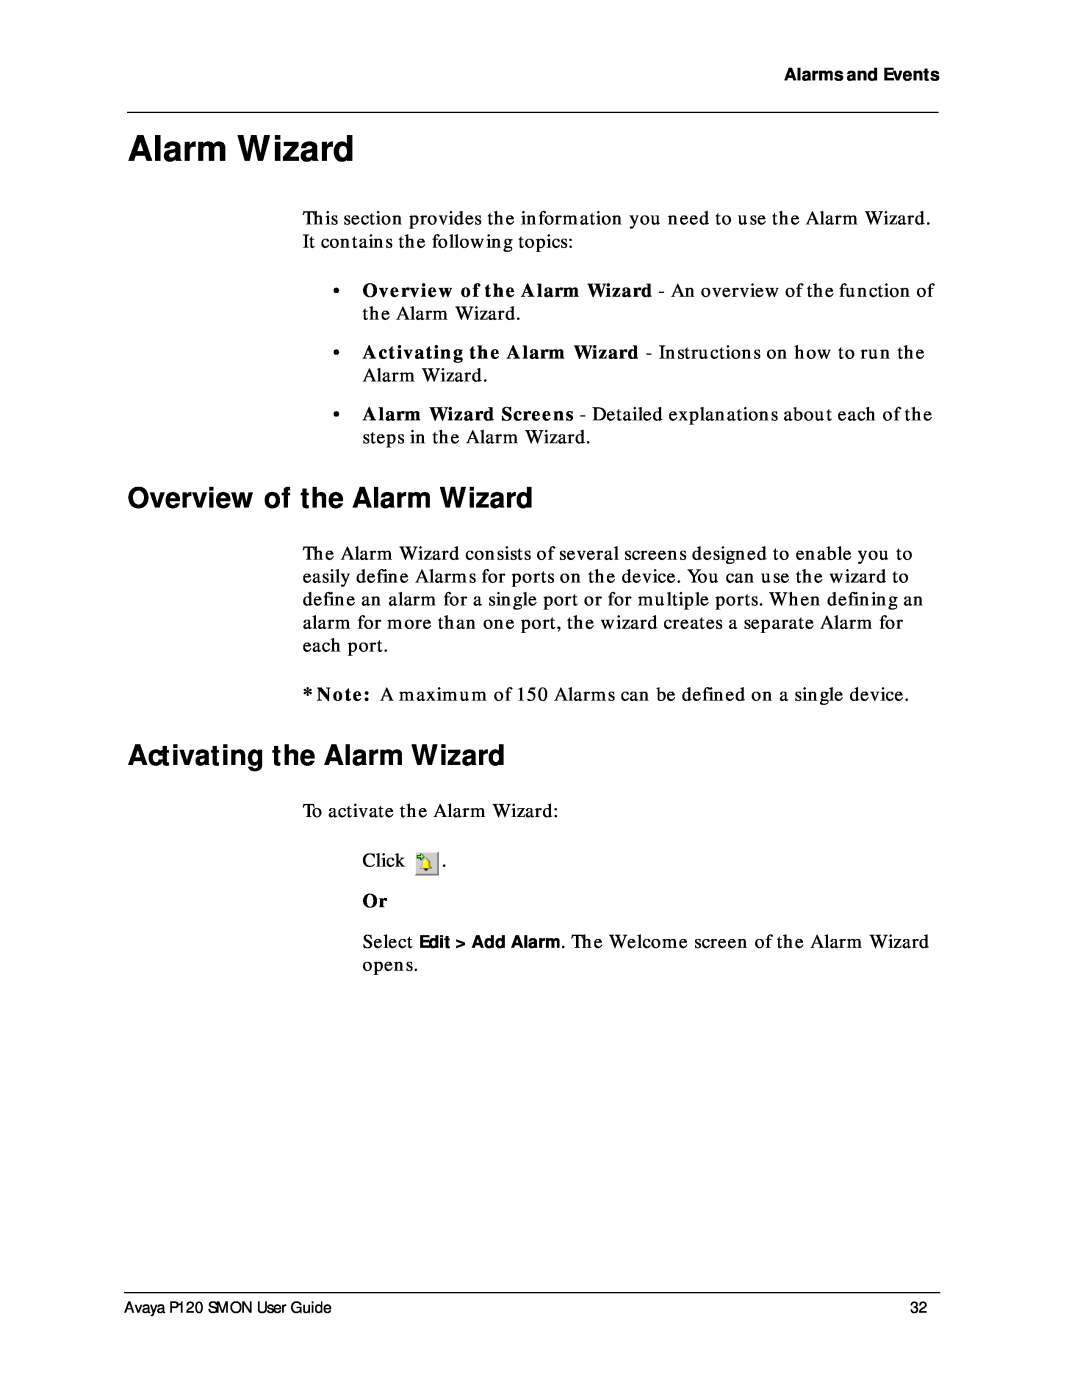 Avaya P120 SMON manual Overview of the Alarm Wizard, Activating the Alarm Wizard 